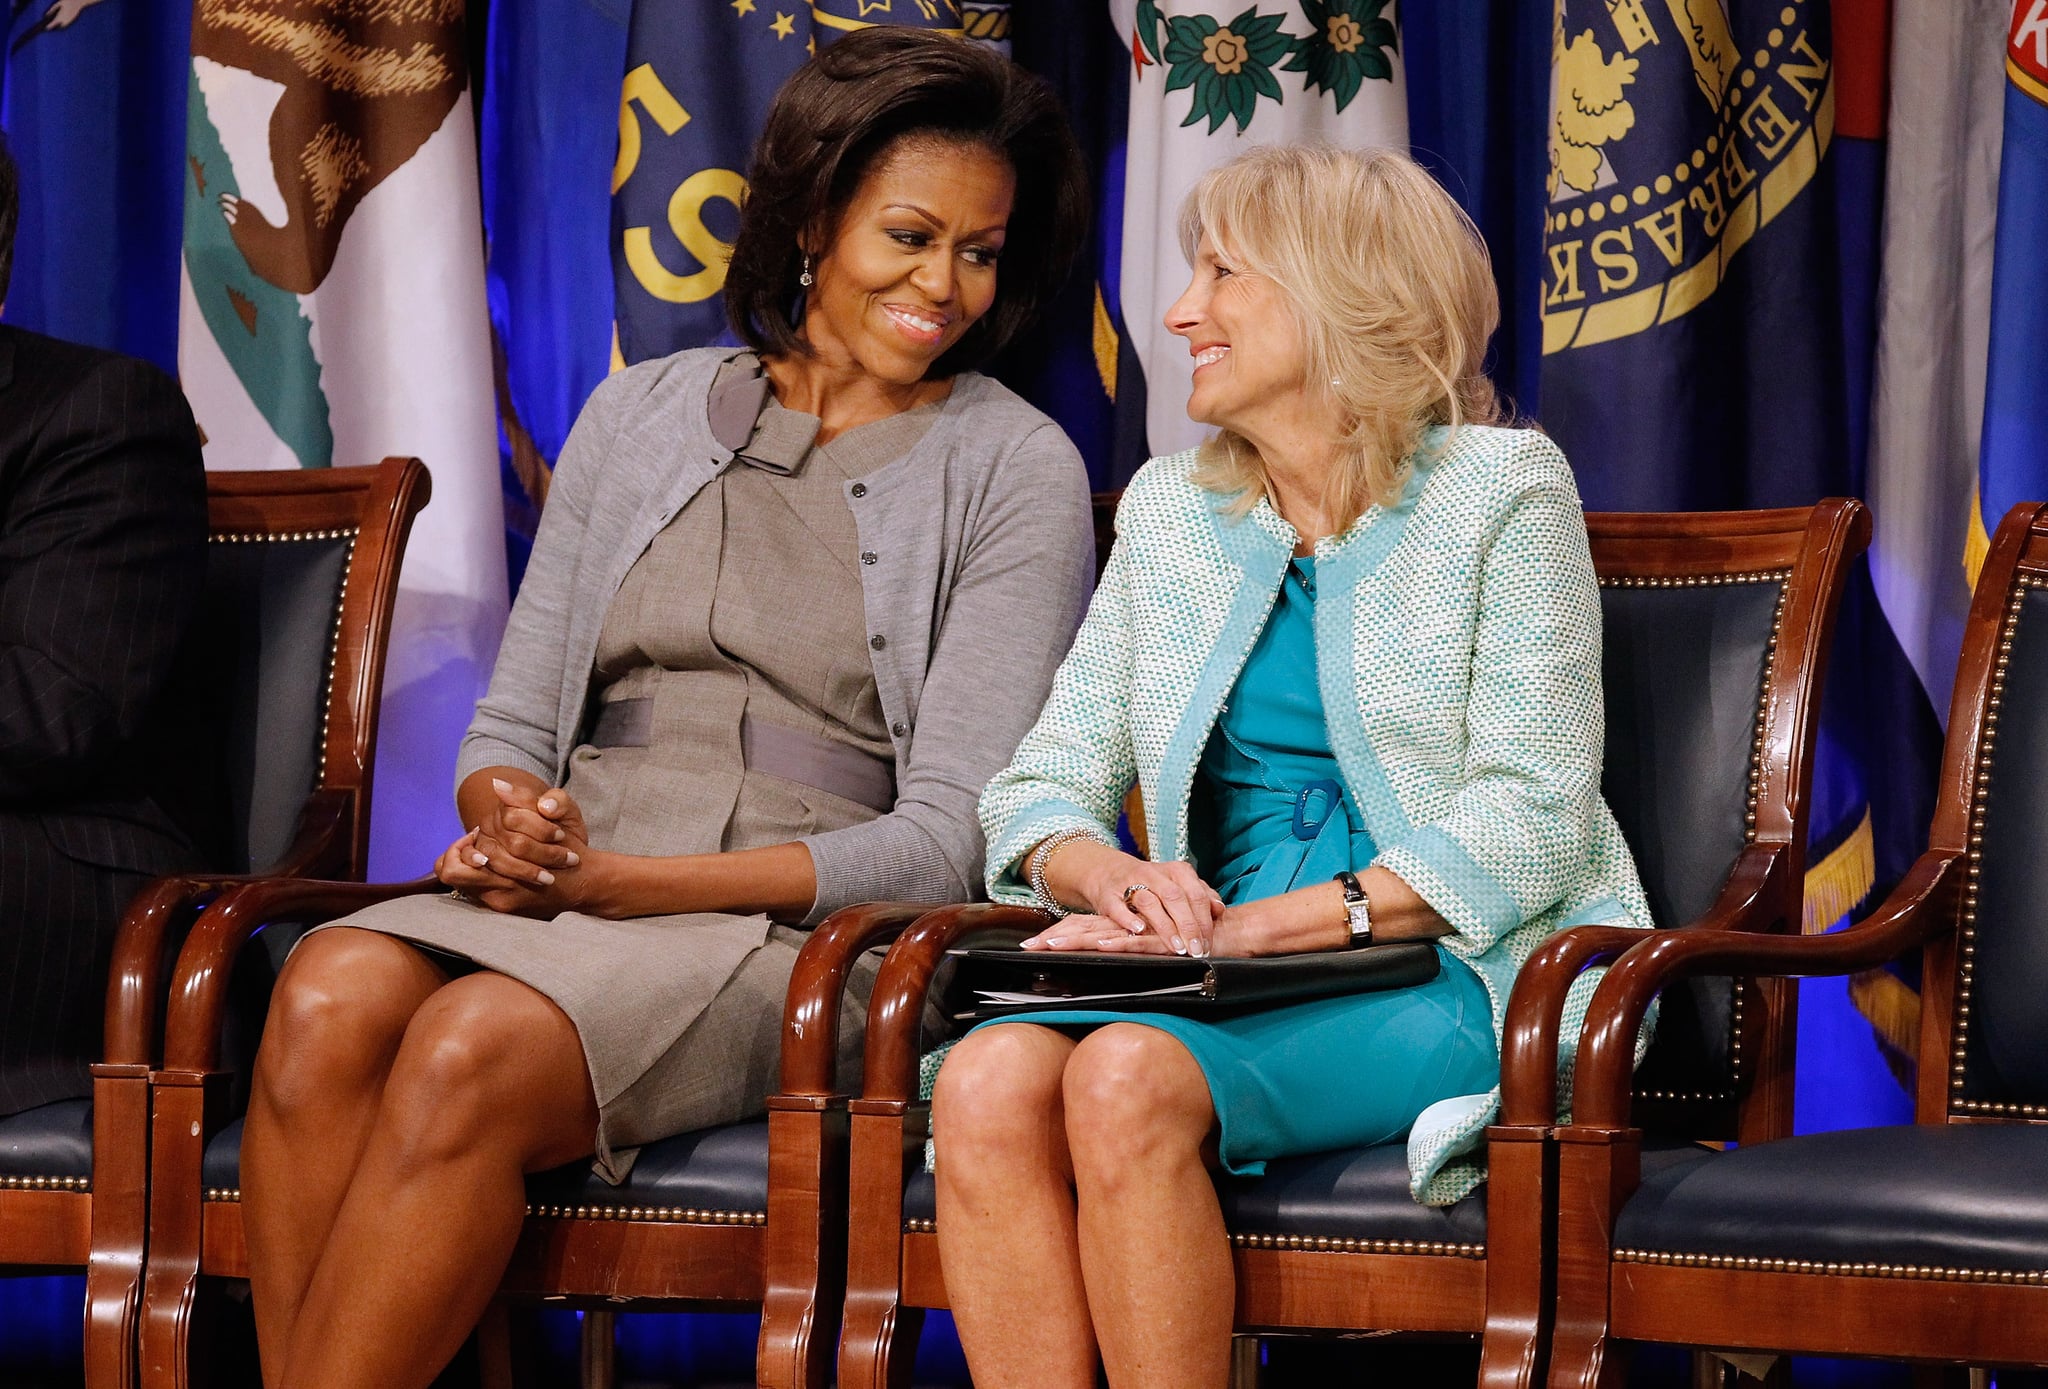 ARLINGTON, VA - FEBRUARY 15:  U.S. first lady Michelle Obama (L) and Dr. Jill Biden attend an event to announce a new report regarding military spouse employment at the Pentagon February 15, 2012 in Arlington, Virginia. The report,